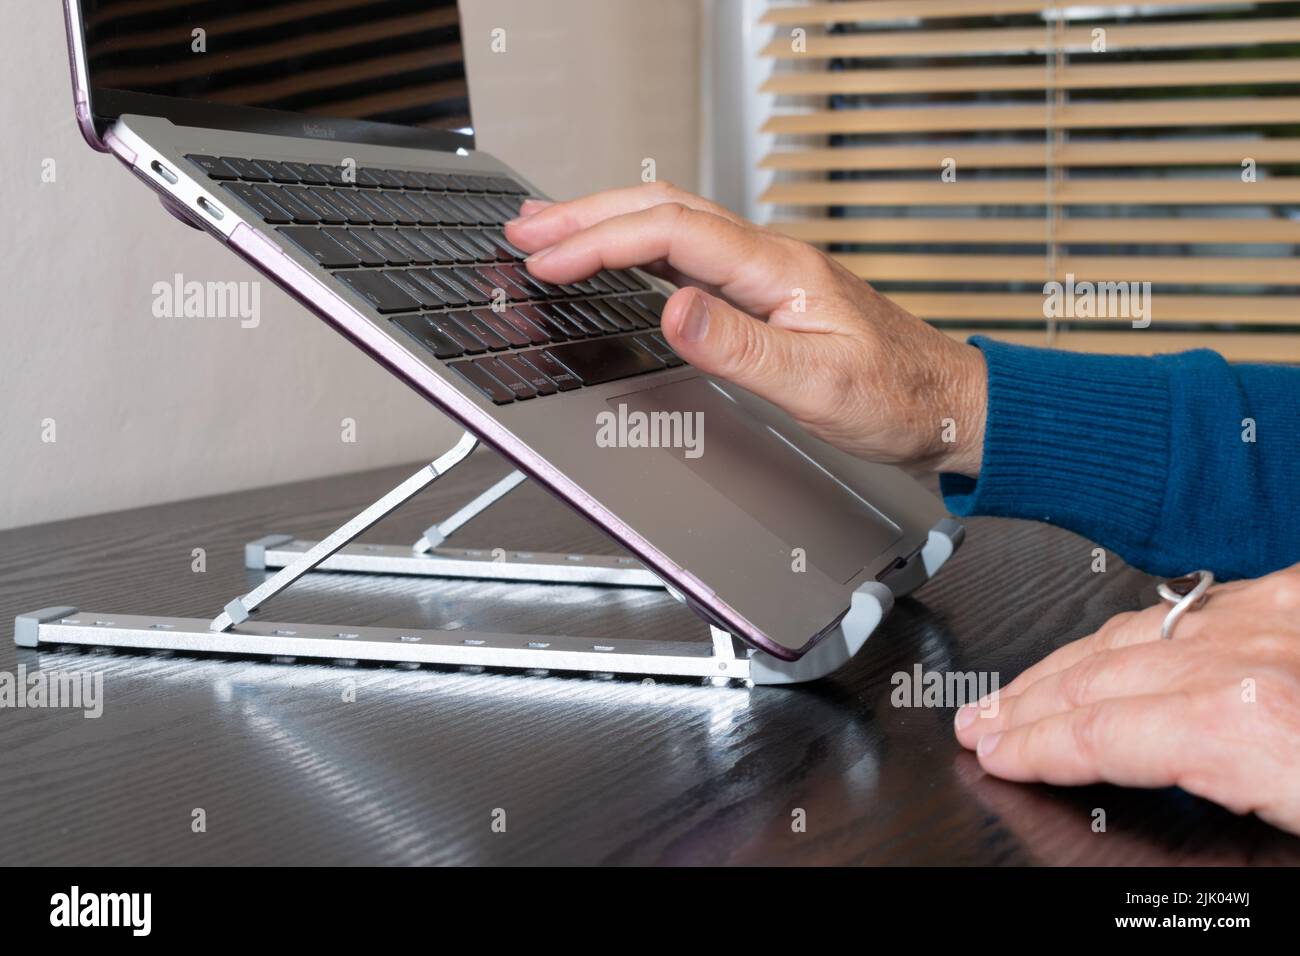 Laptop stand for wrist protection and neck posture. Foldable adjustable stand with hand typing on laptop screen raised to eye height in home office. Stock Photo